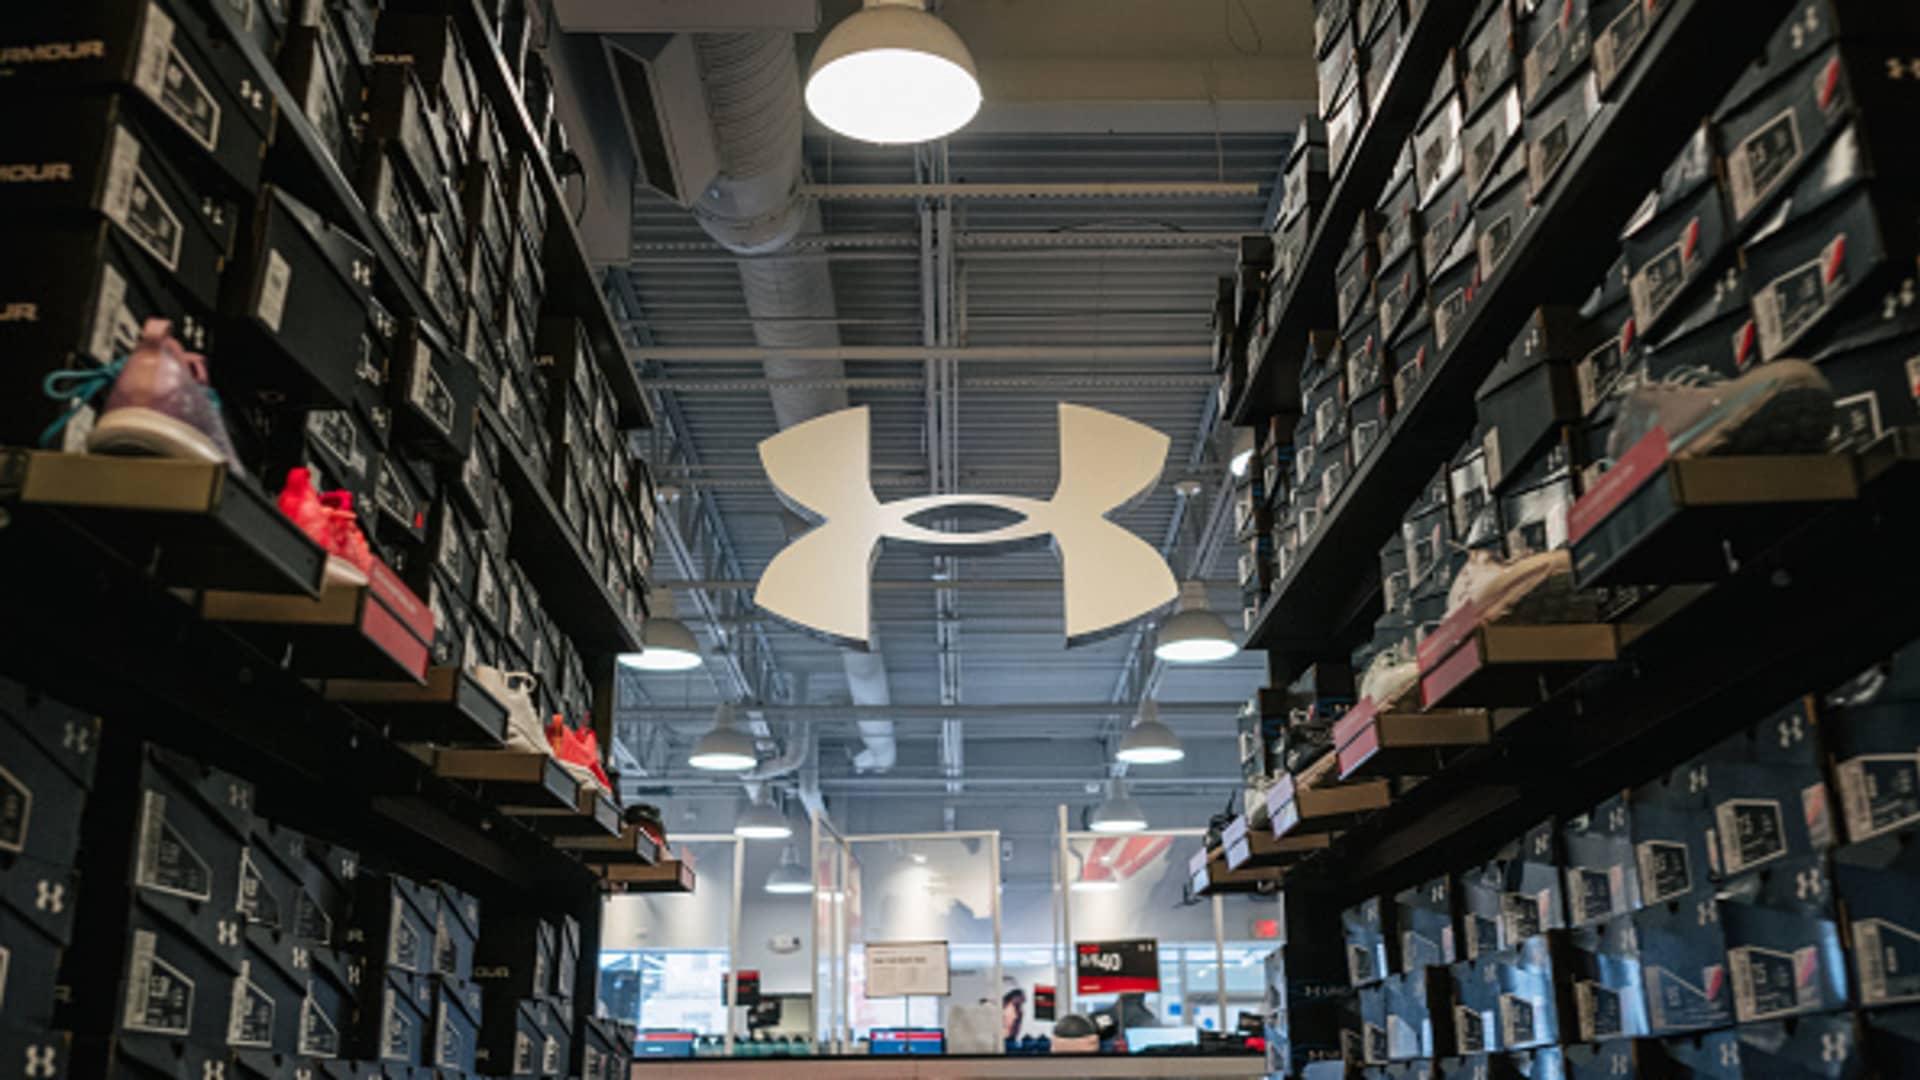 under-armour-misses-sales-expectations,-swings-to-unexpected-loss-due-to-supply-chain-woes